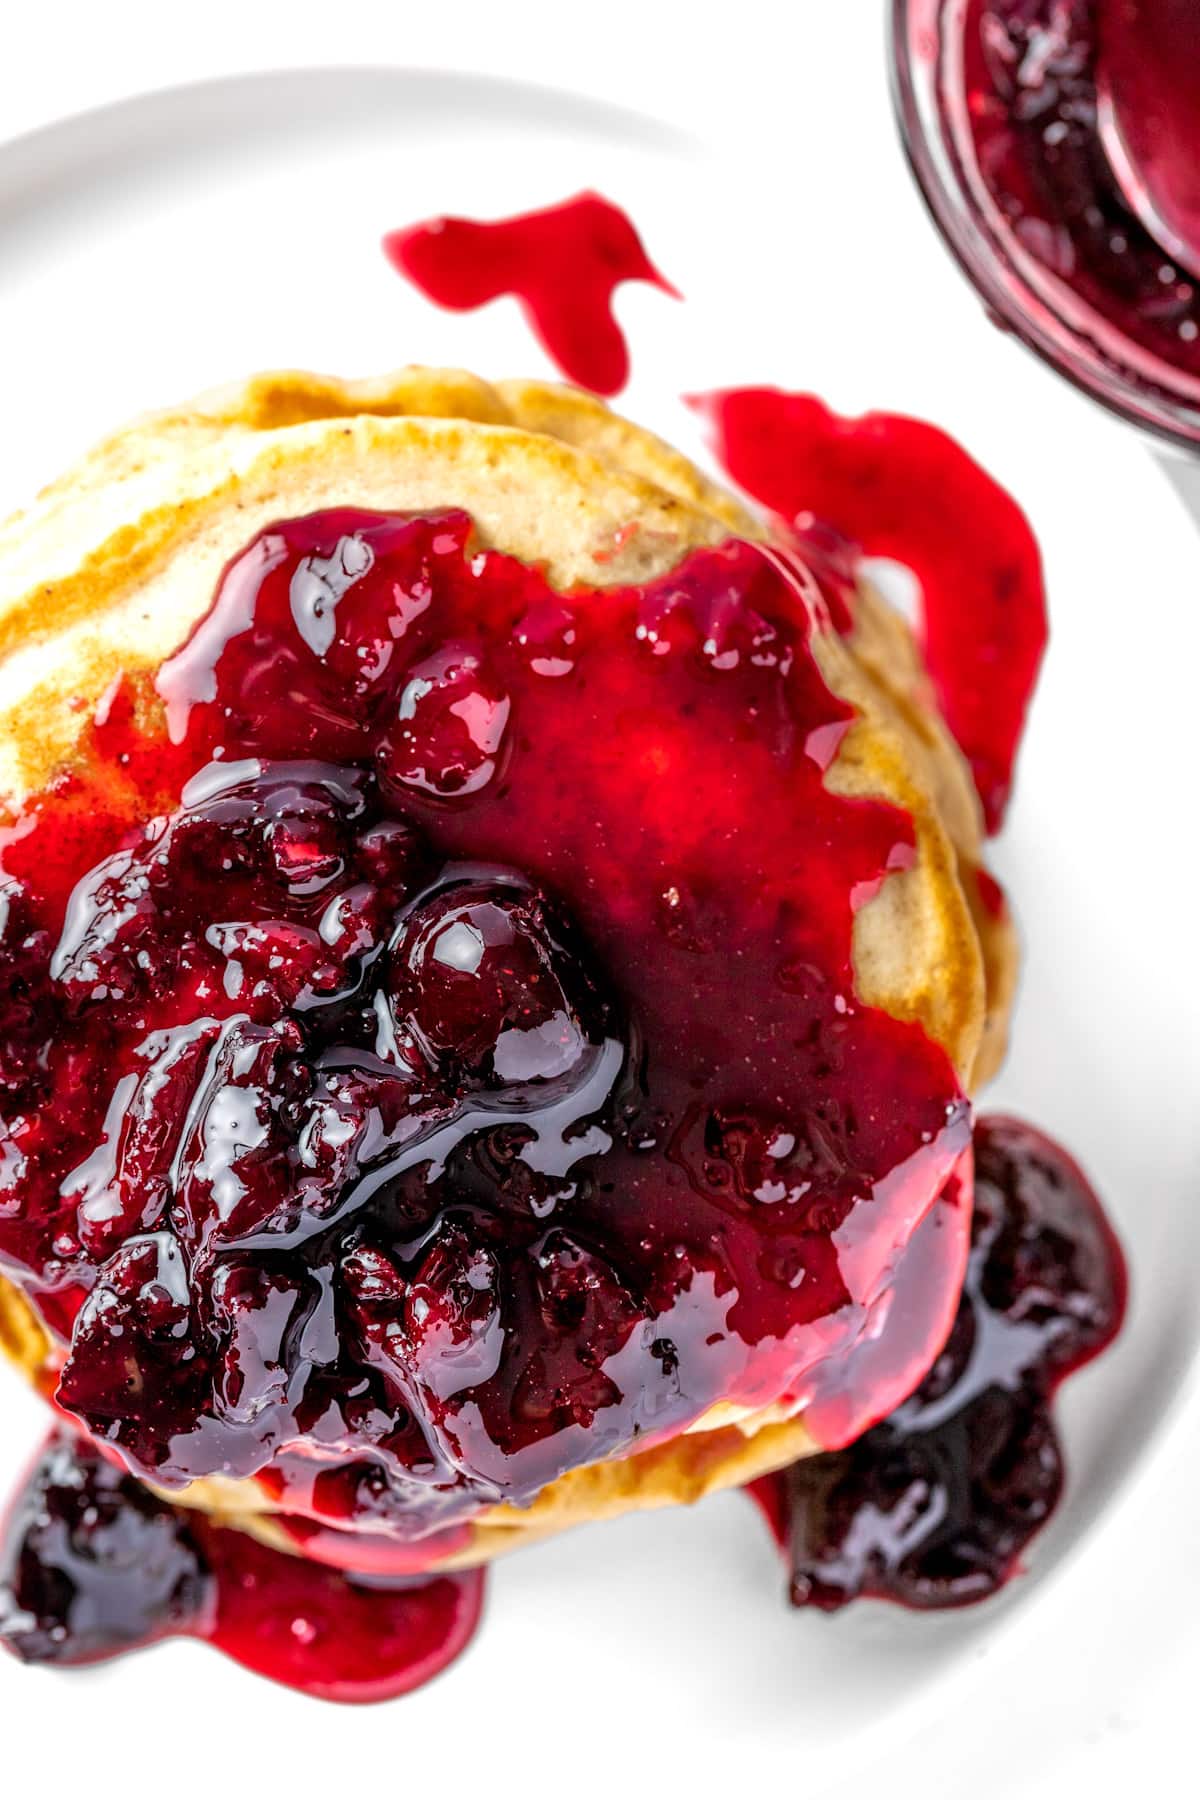 Overhead view of a stack of pancakes, topped with red cherry syrup.